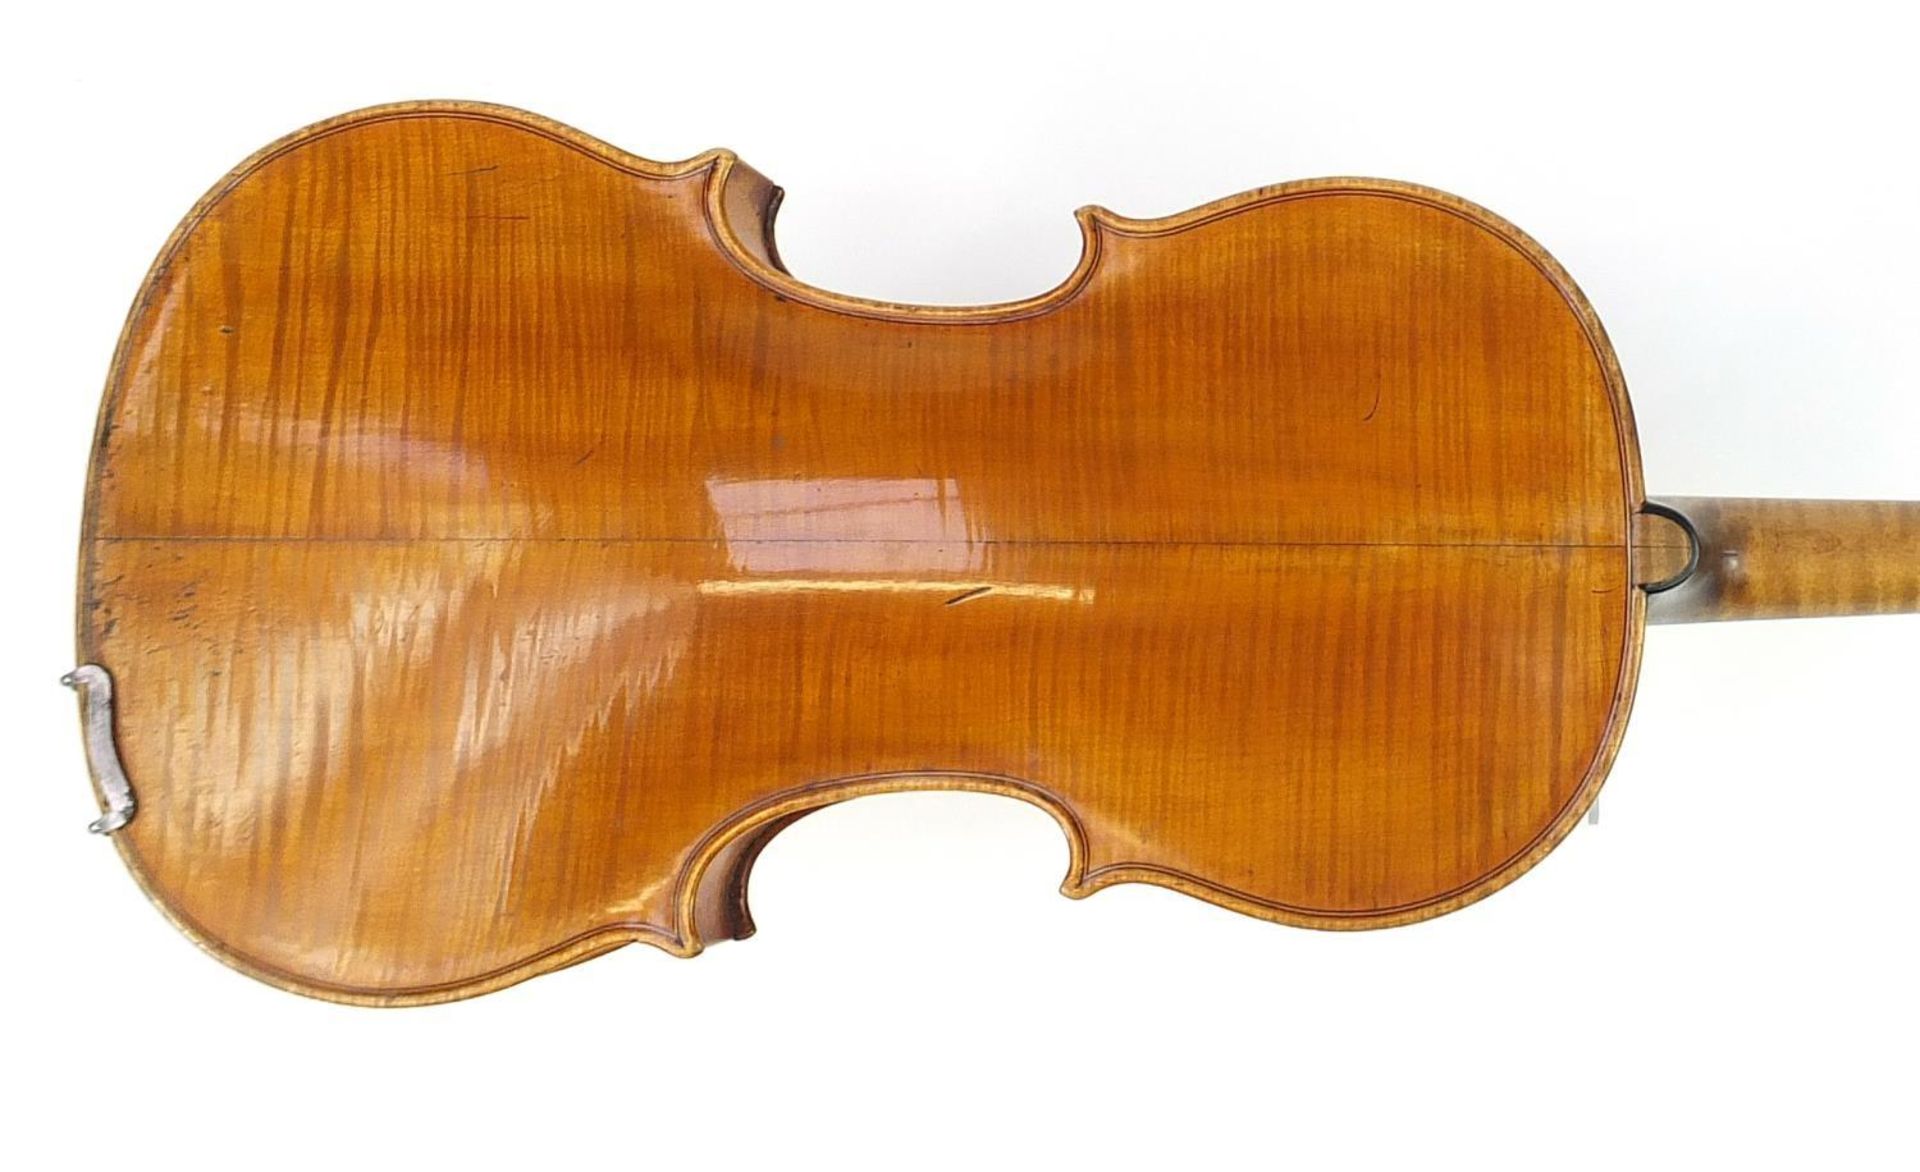 Old wooden violin bearing an Andre Castagneri paper label, the violin back 14 inches in length - Image 6 of 10